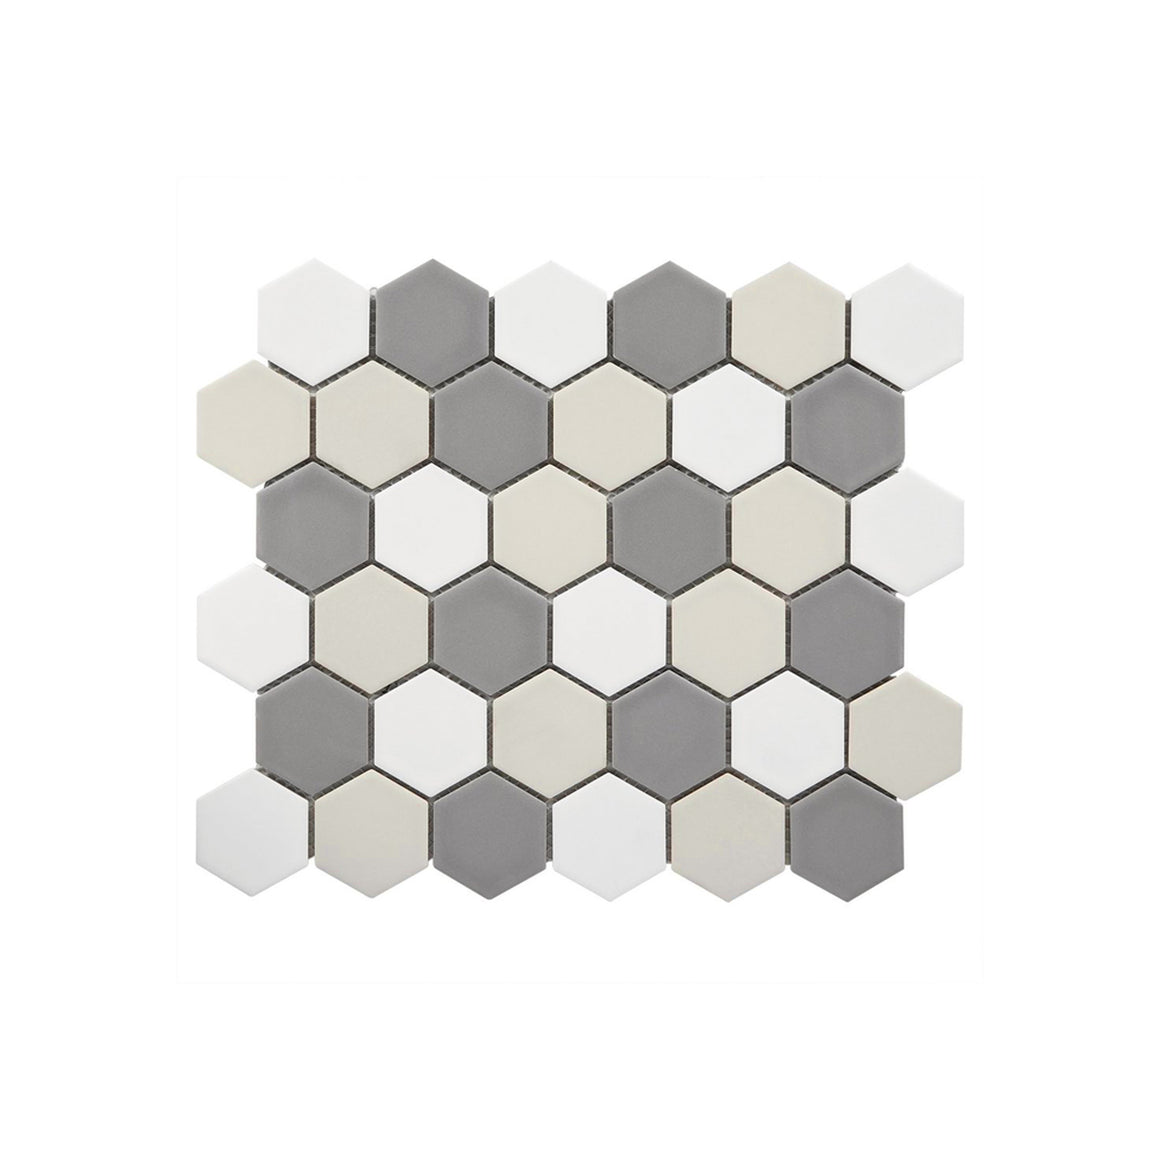 2" Hexagon Shades of Creme and Gray Matte Porcelain Mosaic